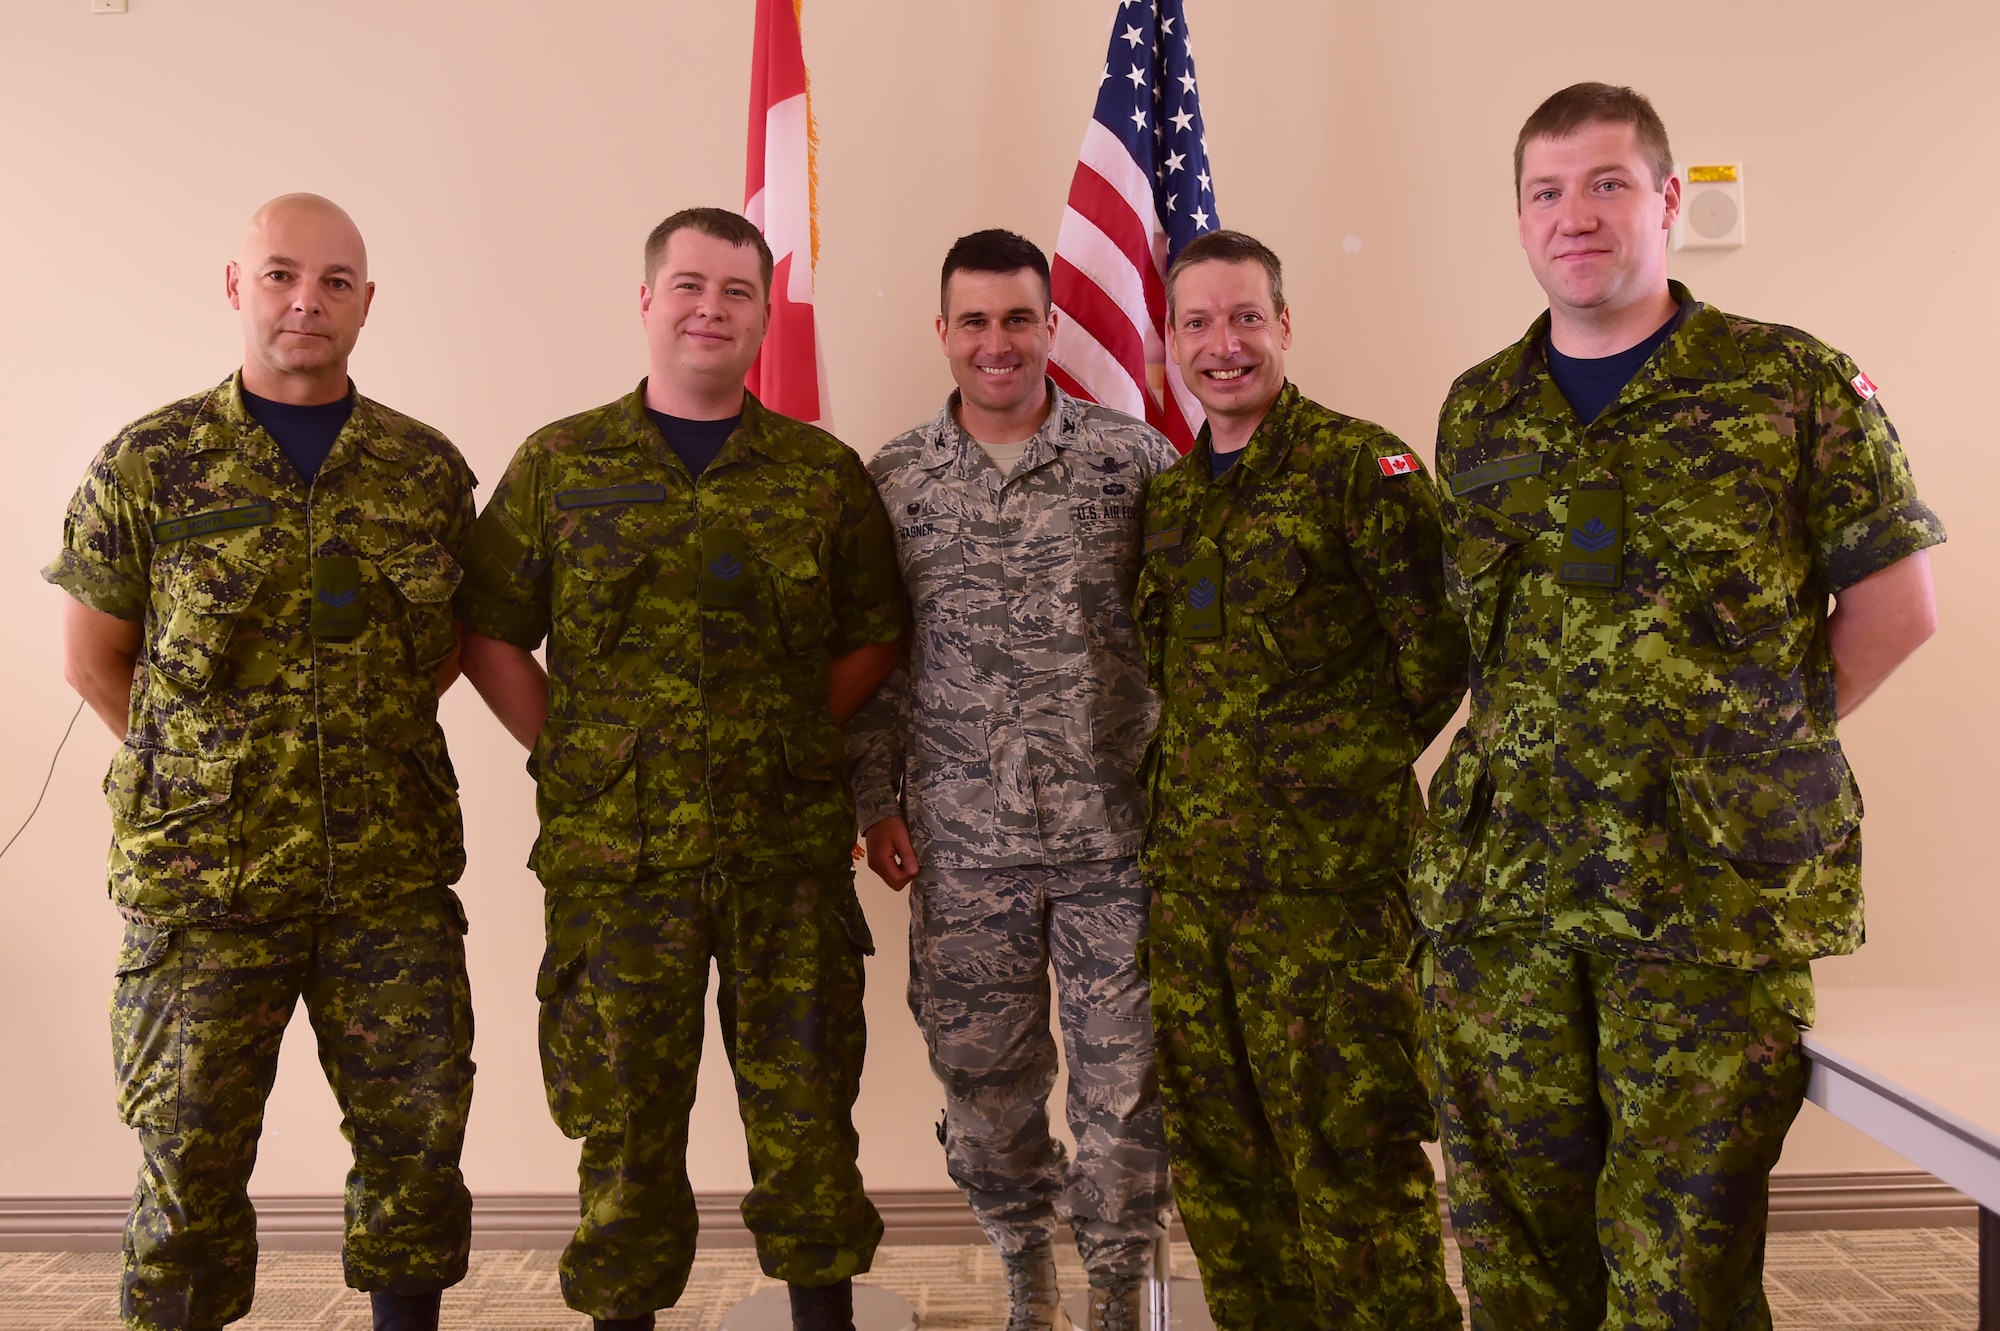 Col. John Wagner, 460th Space Wing commander, stands side-by-side with Canadian service members to recognize Canada Day at the Buckley Chapel Fellowship Luncheon July 1, 2015, on Buckley Air Force Base, Colo. Wagner spoke on the history of Canada Day and stated the importance of the United States’ alliance with Canada. (U.S. Air Force photo by Airman 1st Class Luke W. Nowakowski/Released)